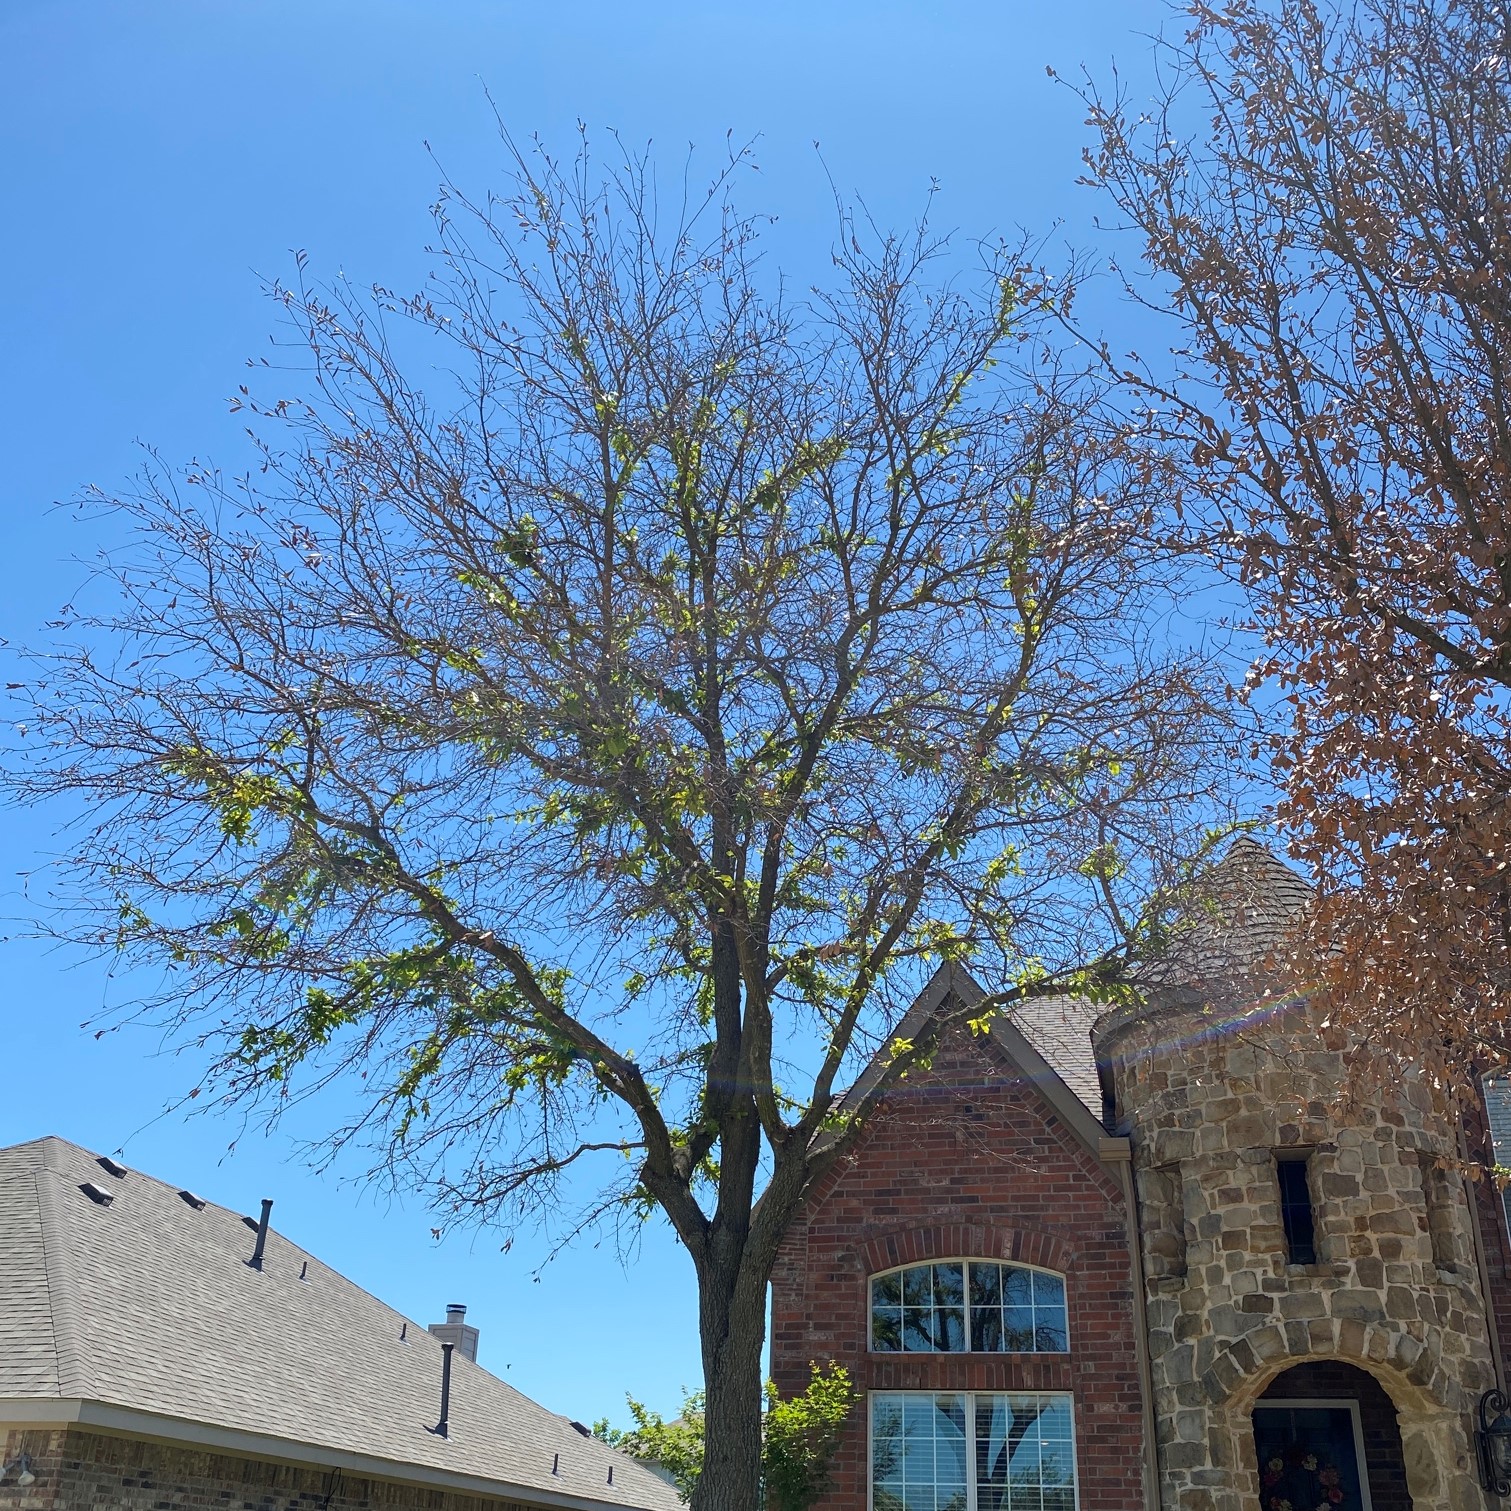 Texas live oak tree showing signs of freeze damage and related stress